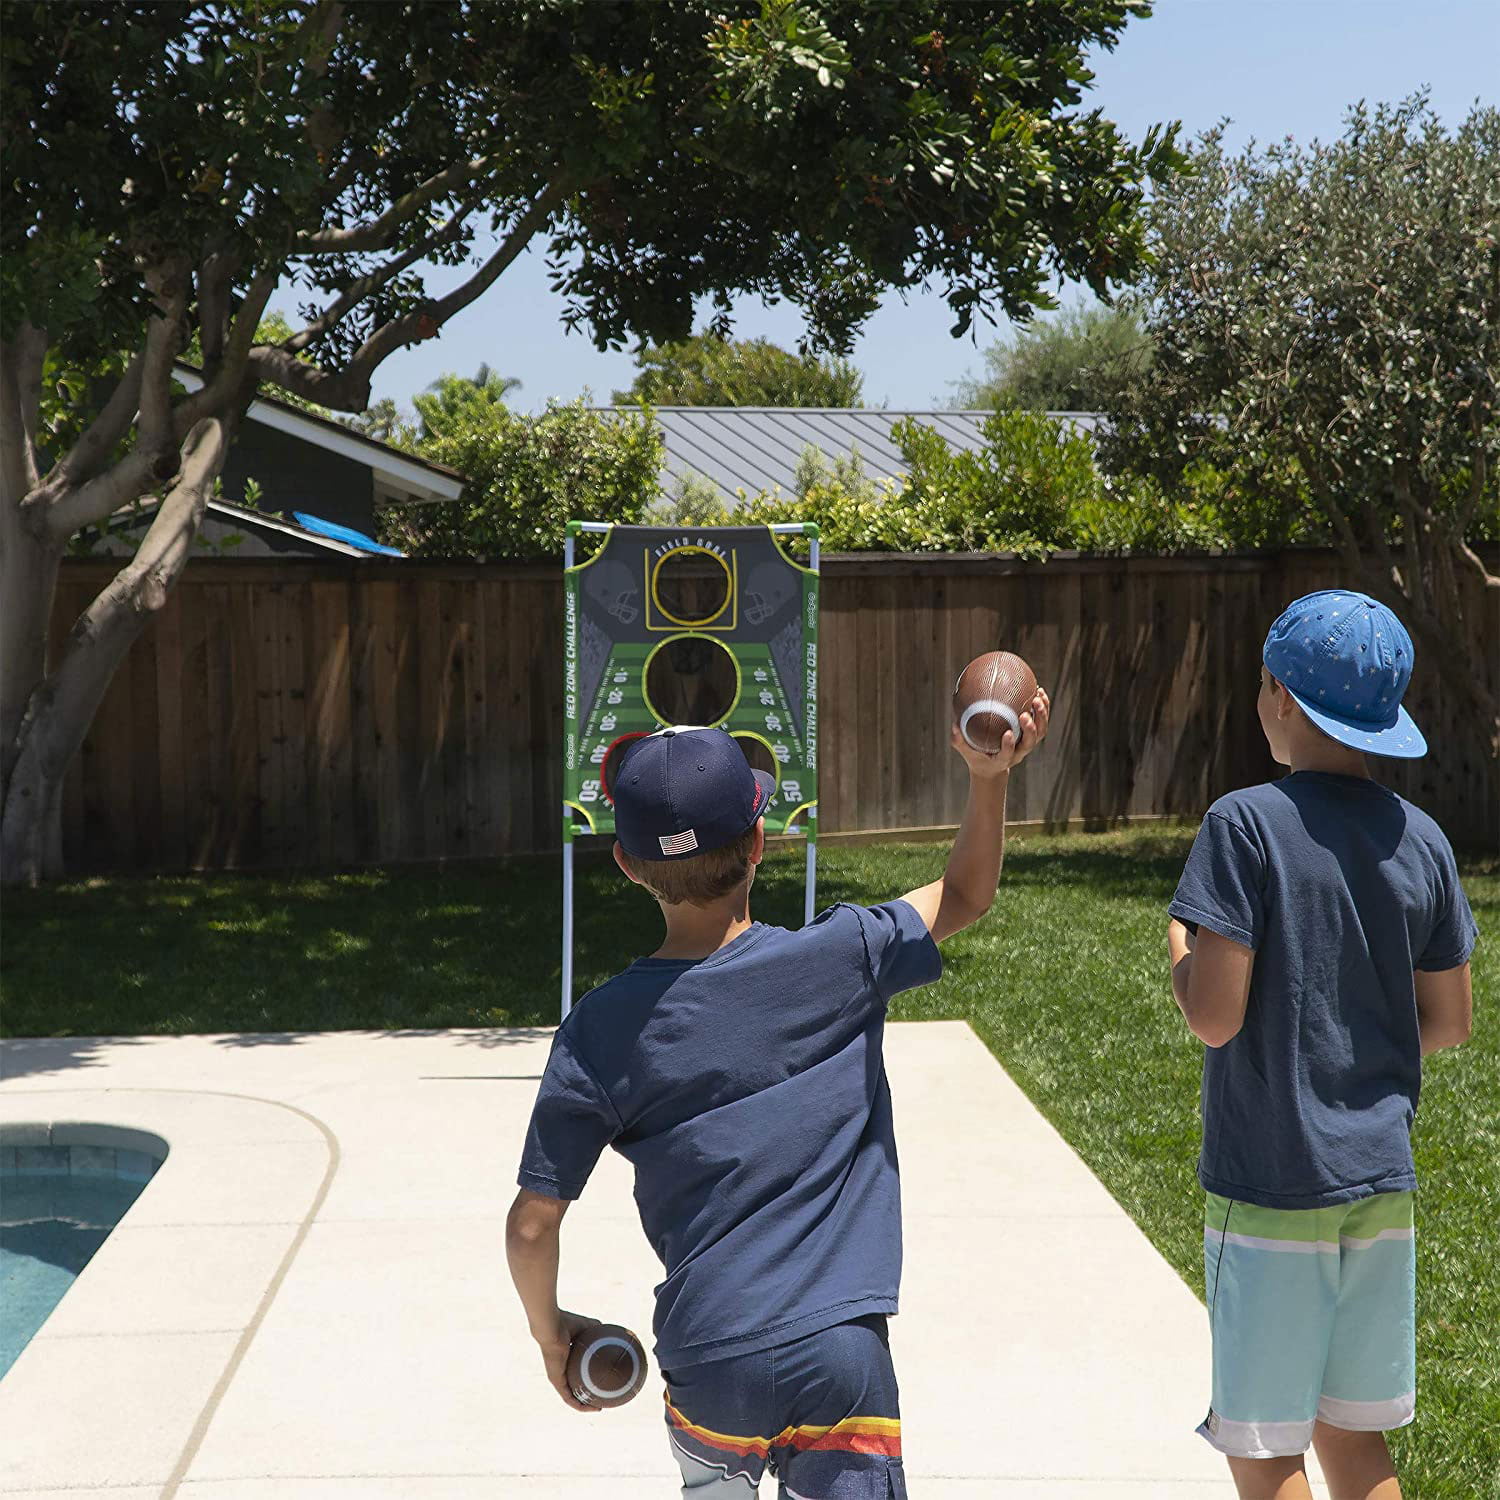 GoSports Football & Baseball Toss Games Available in Football Red Zone Challenge or Baseball Pro Pitch Challenge Choose Between Backyard Toss or Door Hang Targets 